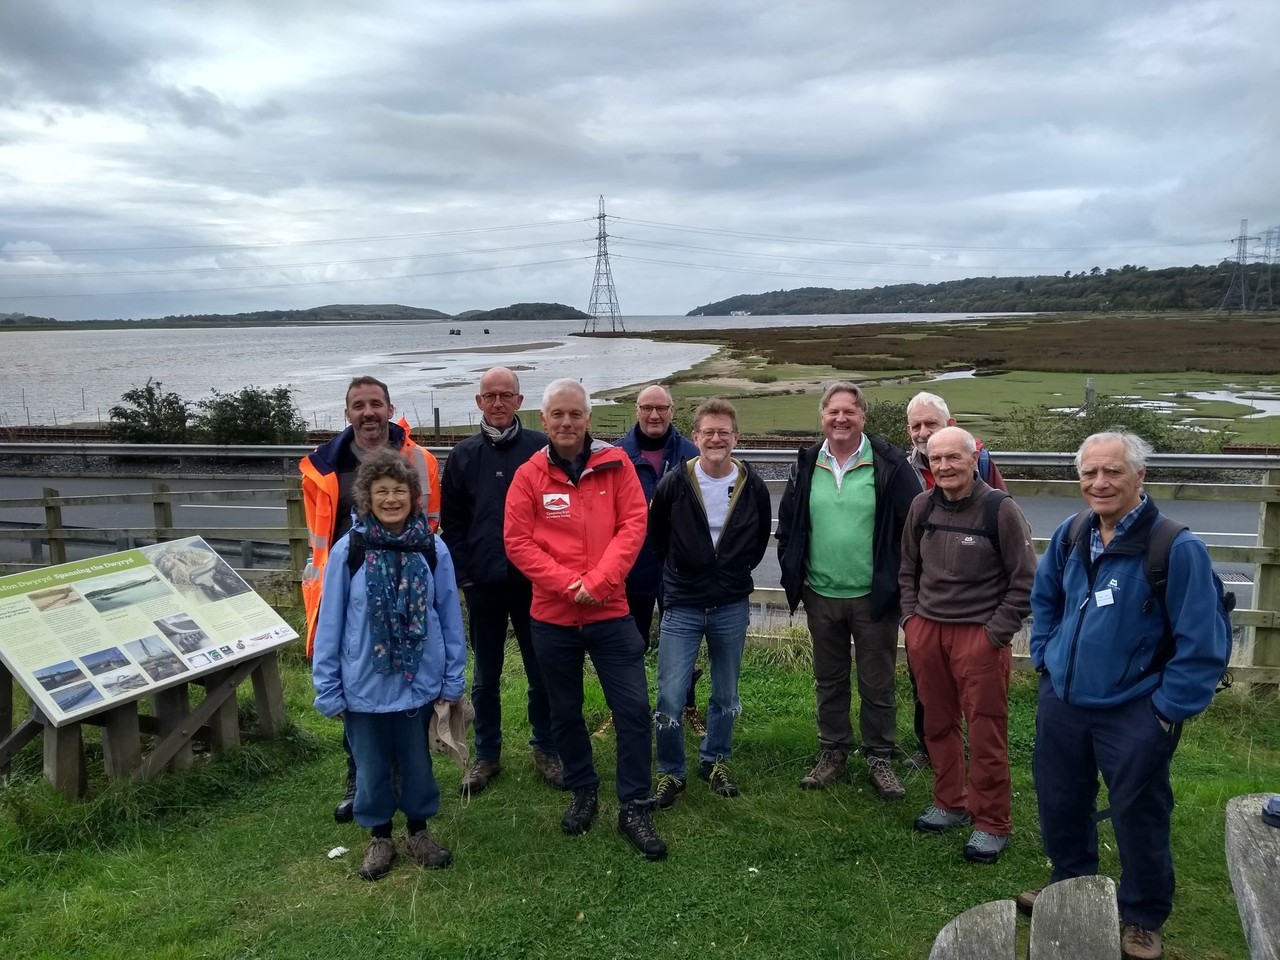 A field trip for National Grid's Snowdonia VIP project stops at Gwaith Powdwr